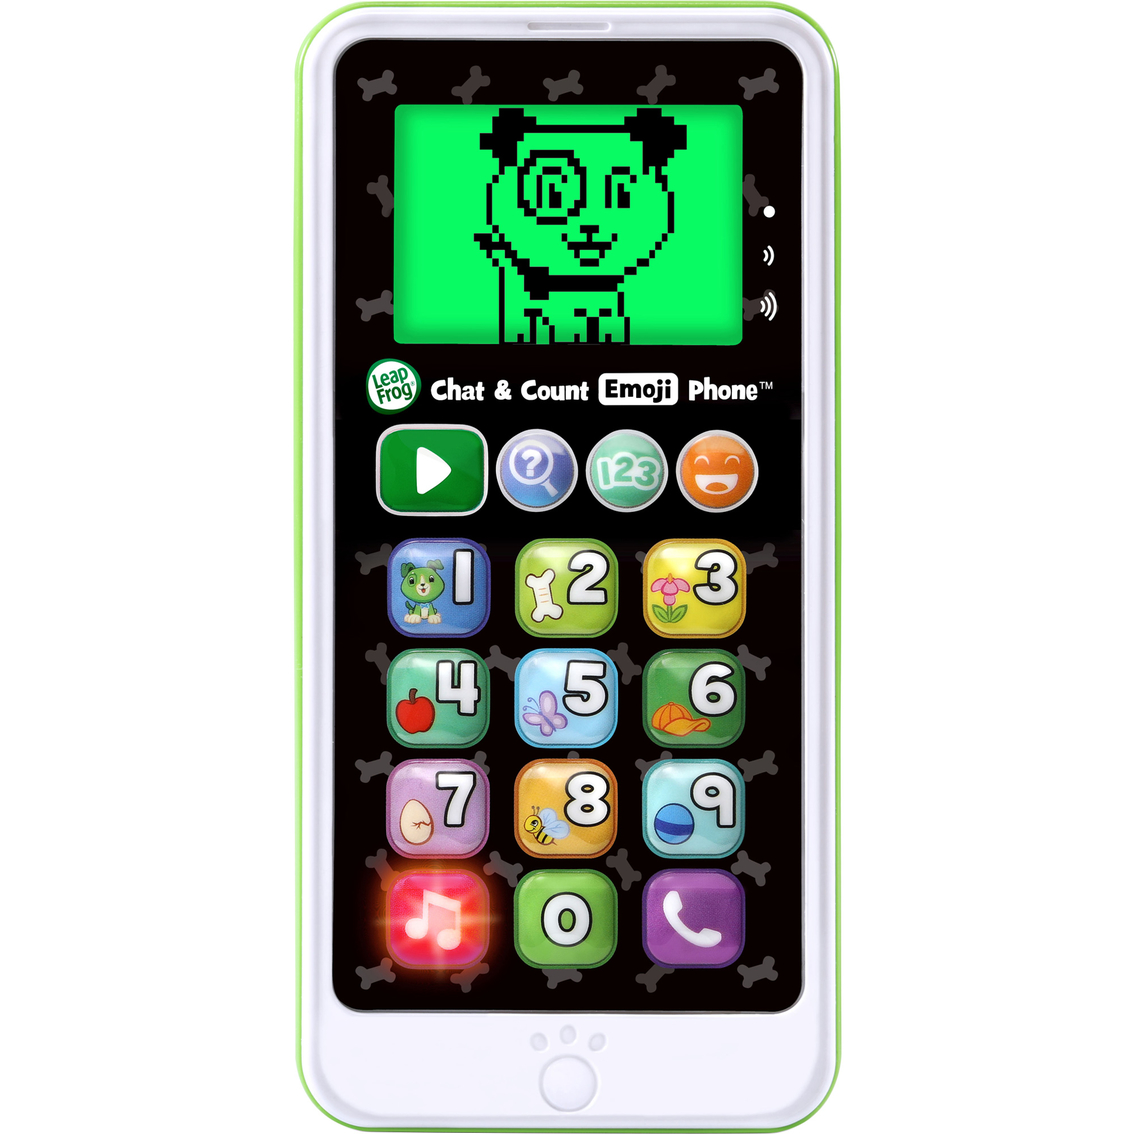 LeapFrog Chat and Count Emoji Phone - Image 2 of 3